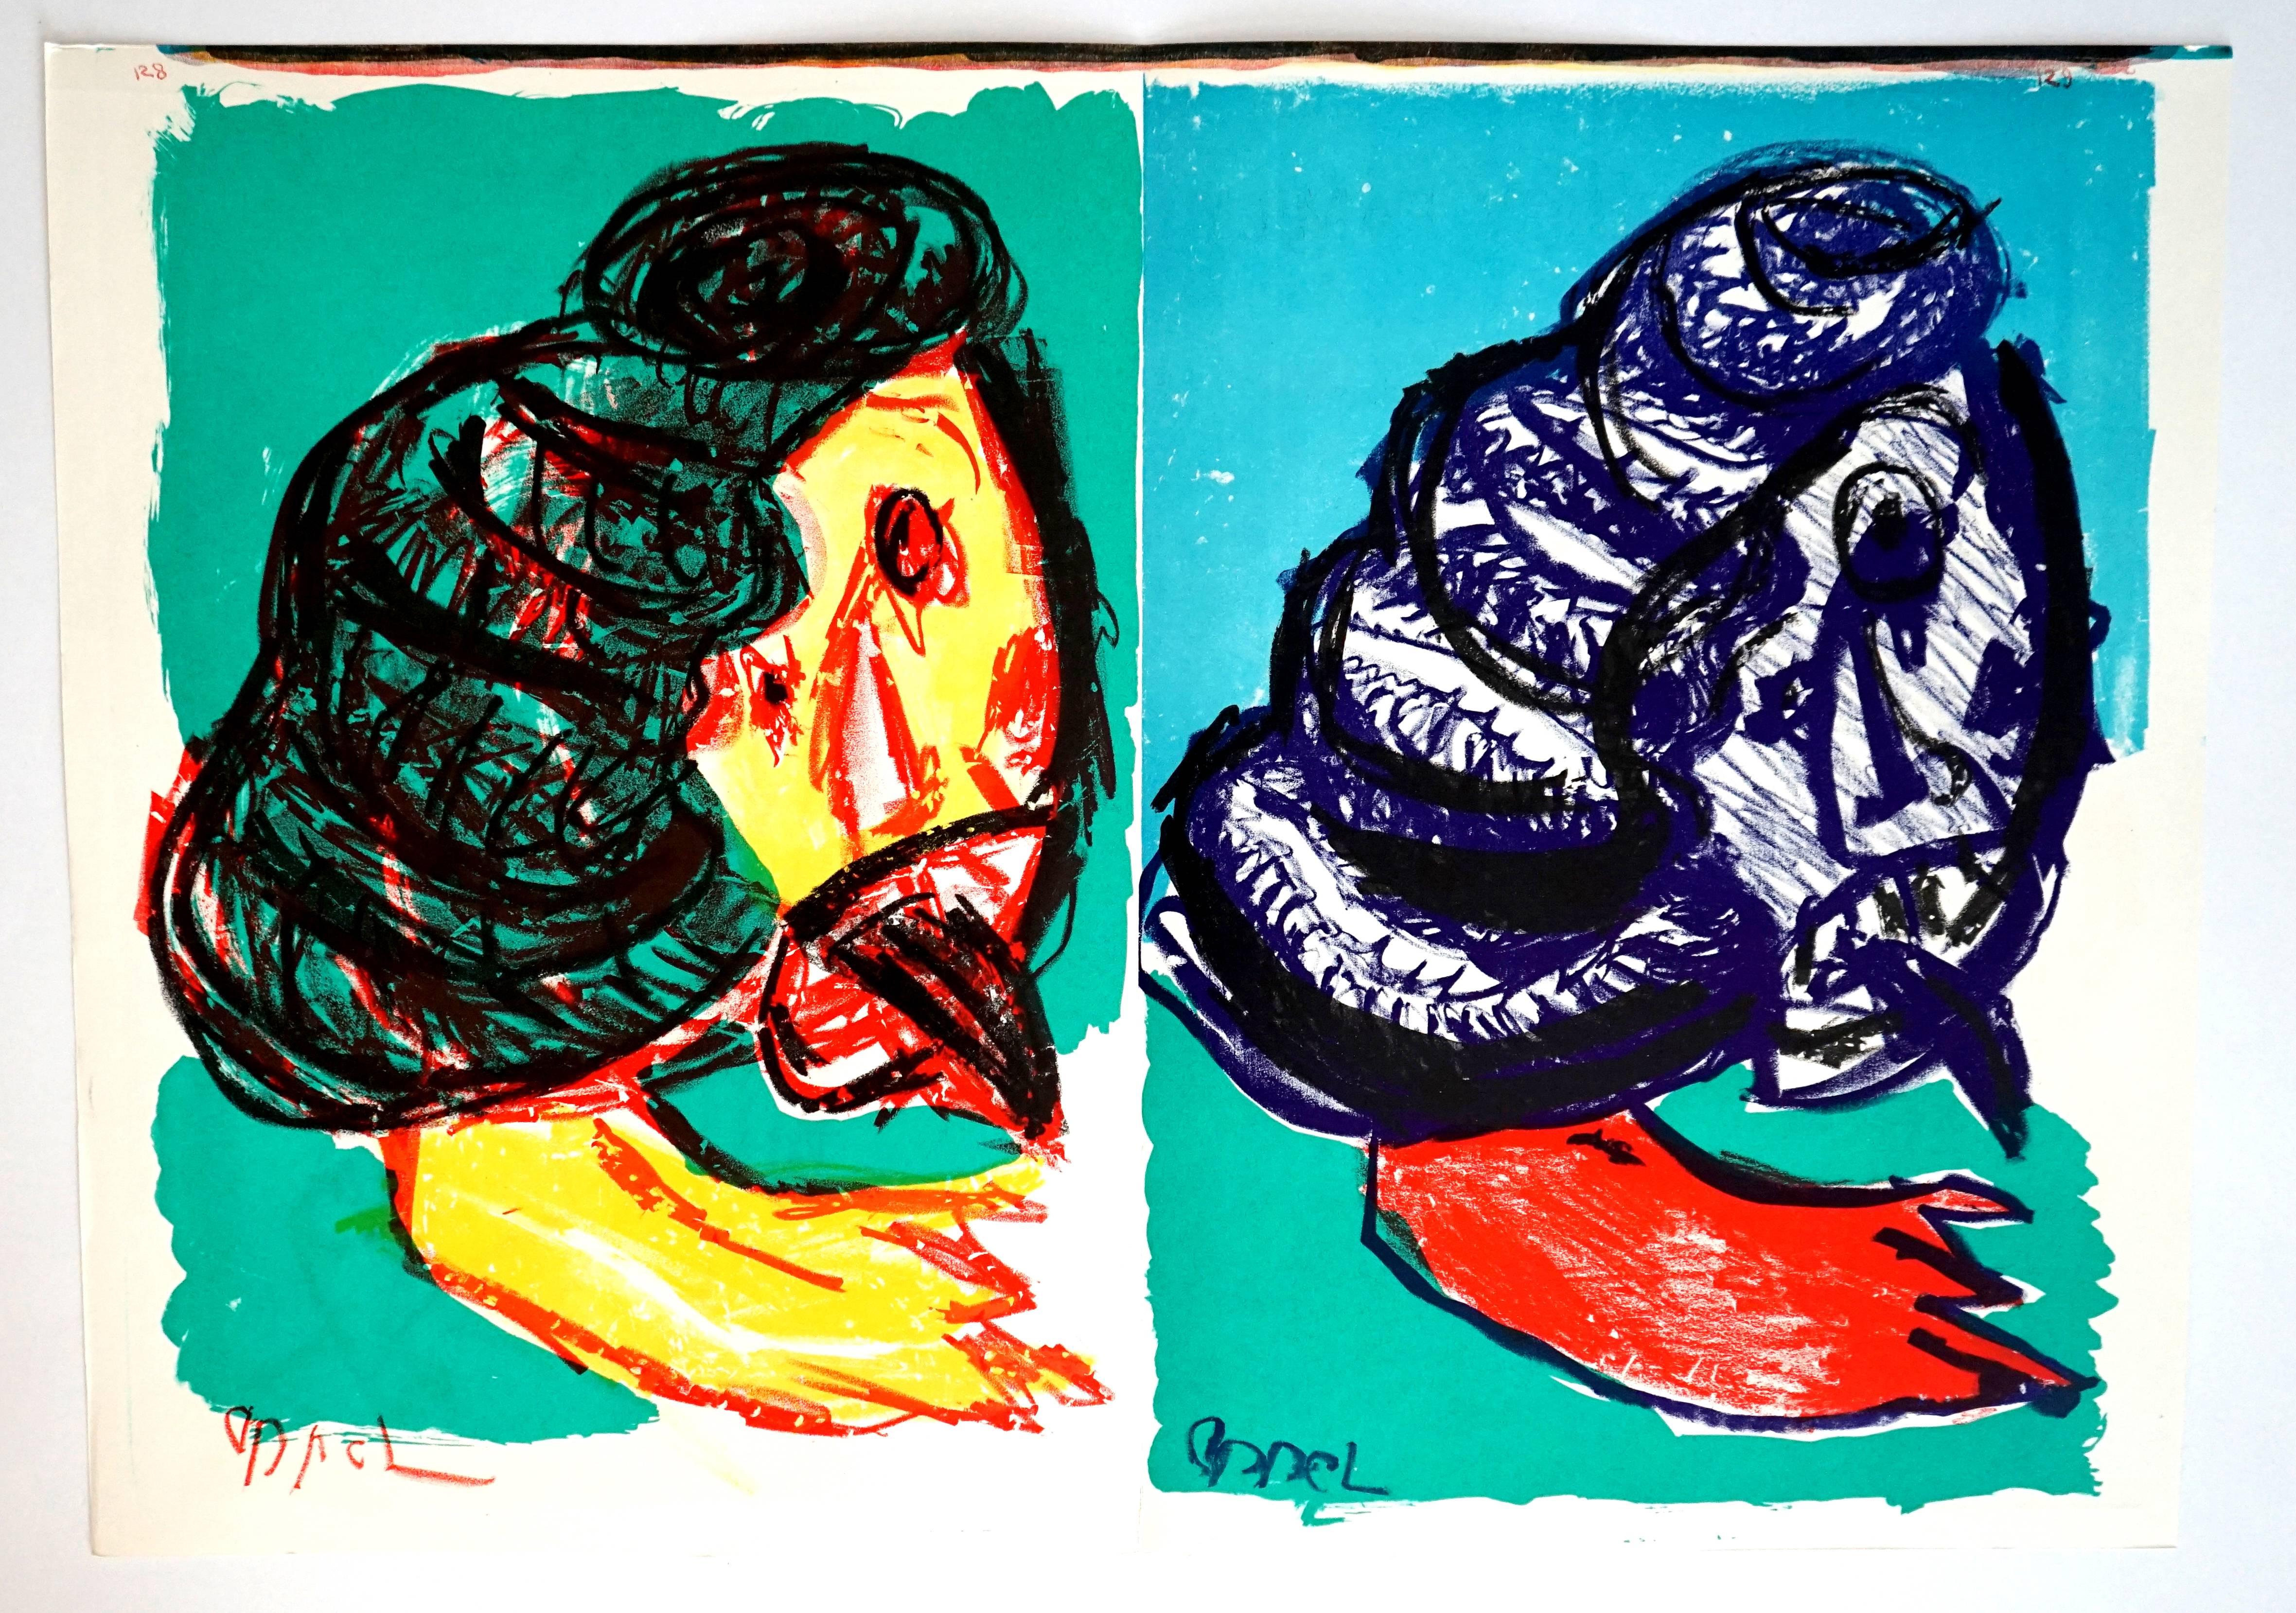 Karel Appel Portrait Print - "Untitled": Double Lithograph from One Cent Life